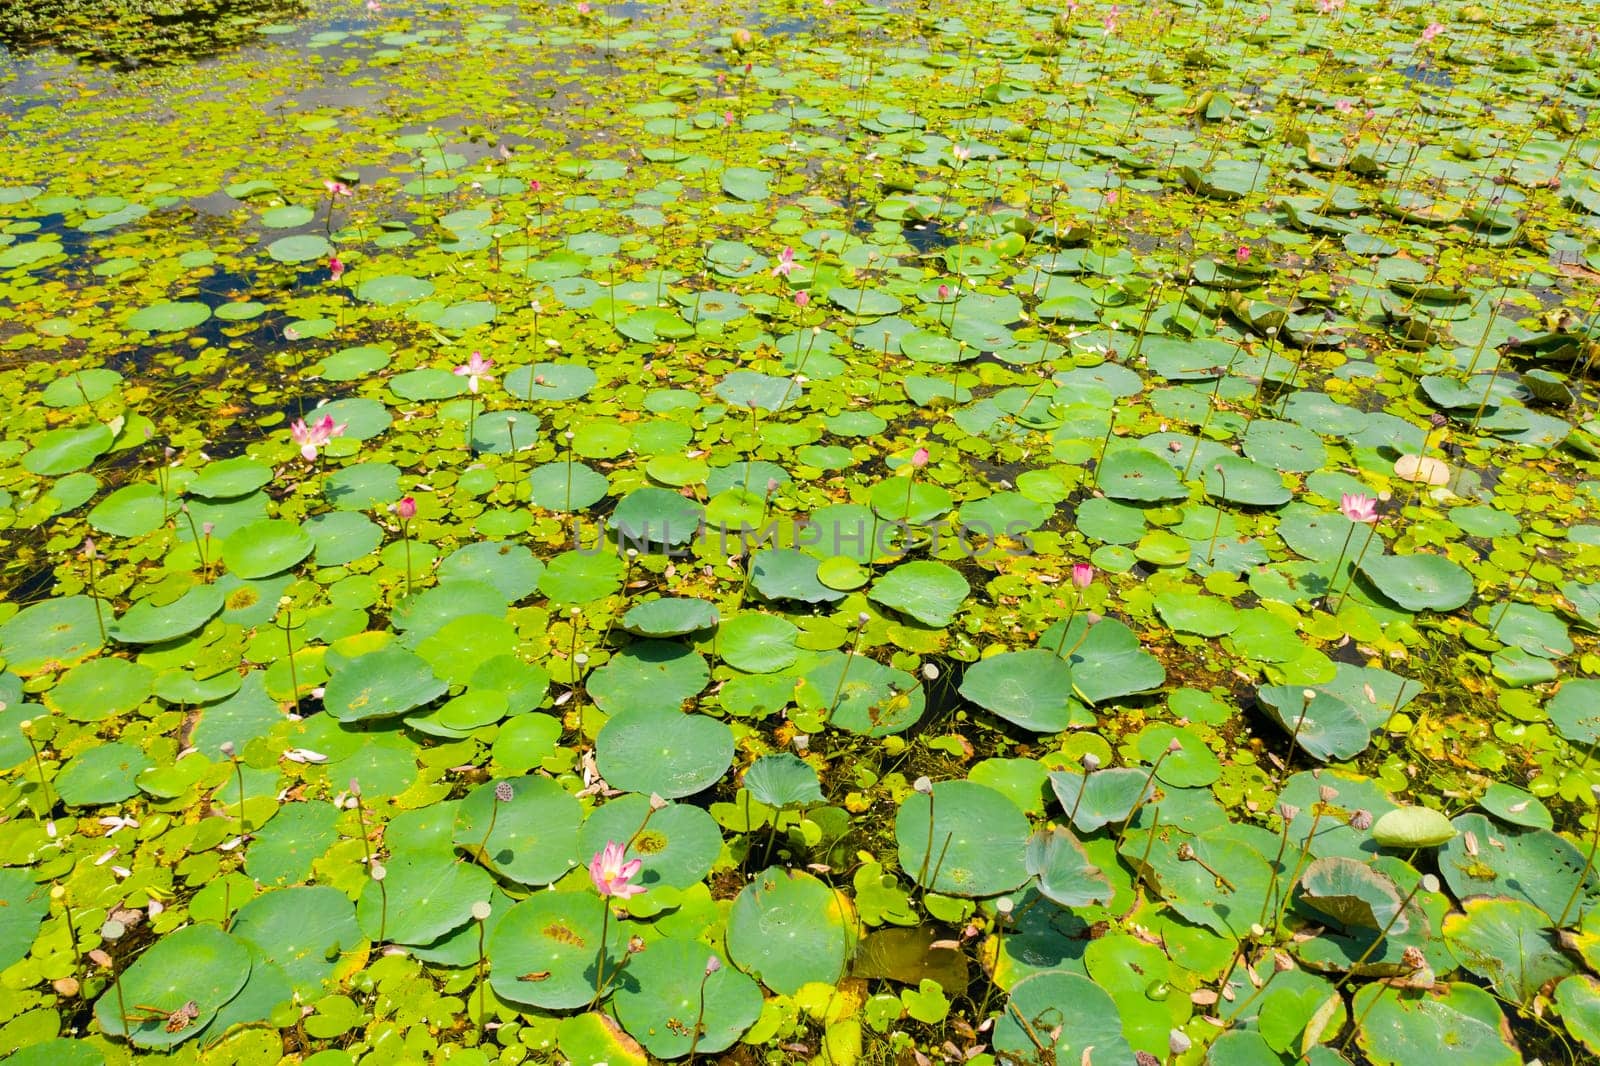 Top view of surface of the pond with blooming lotuses. Sri Lanka.